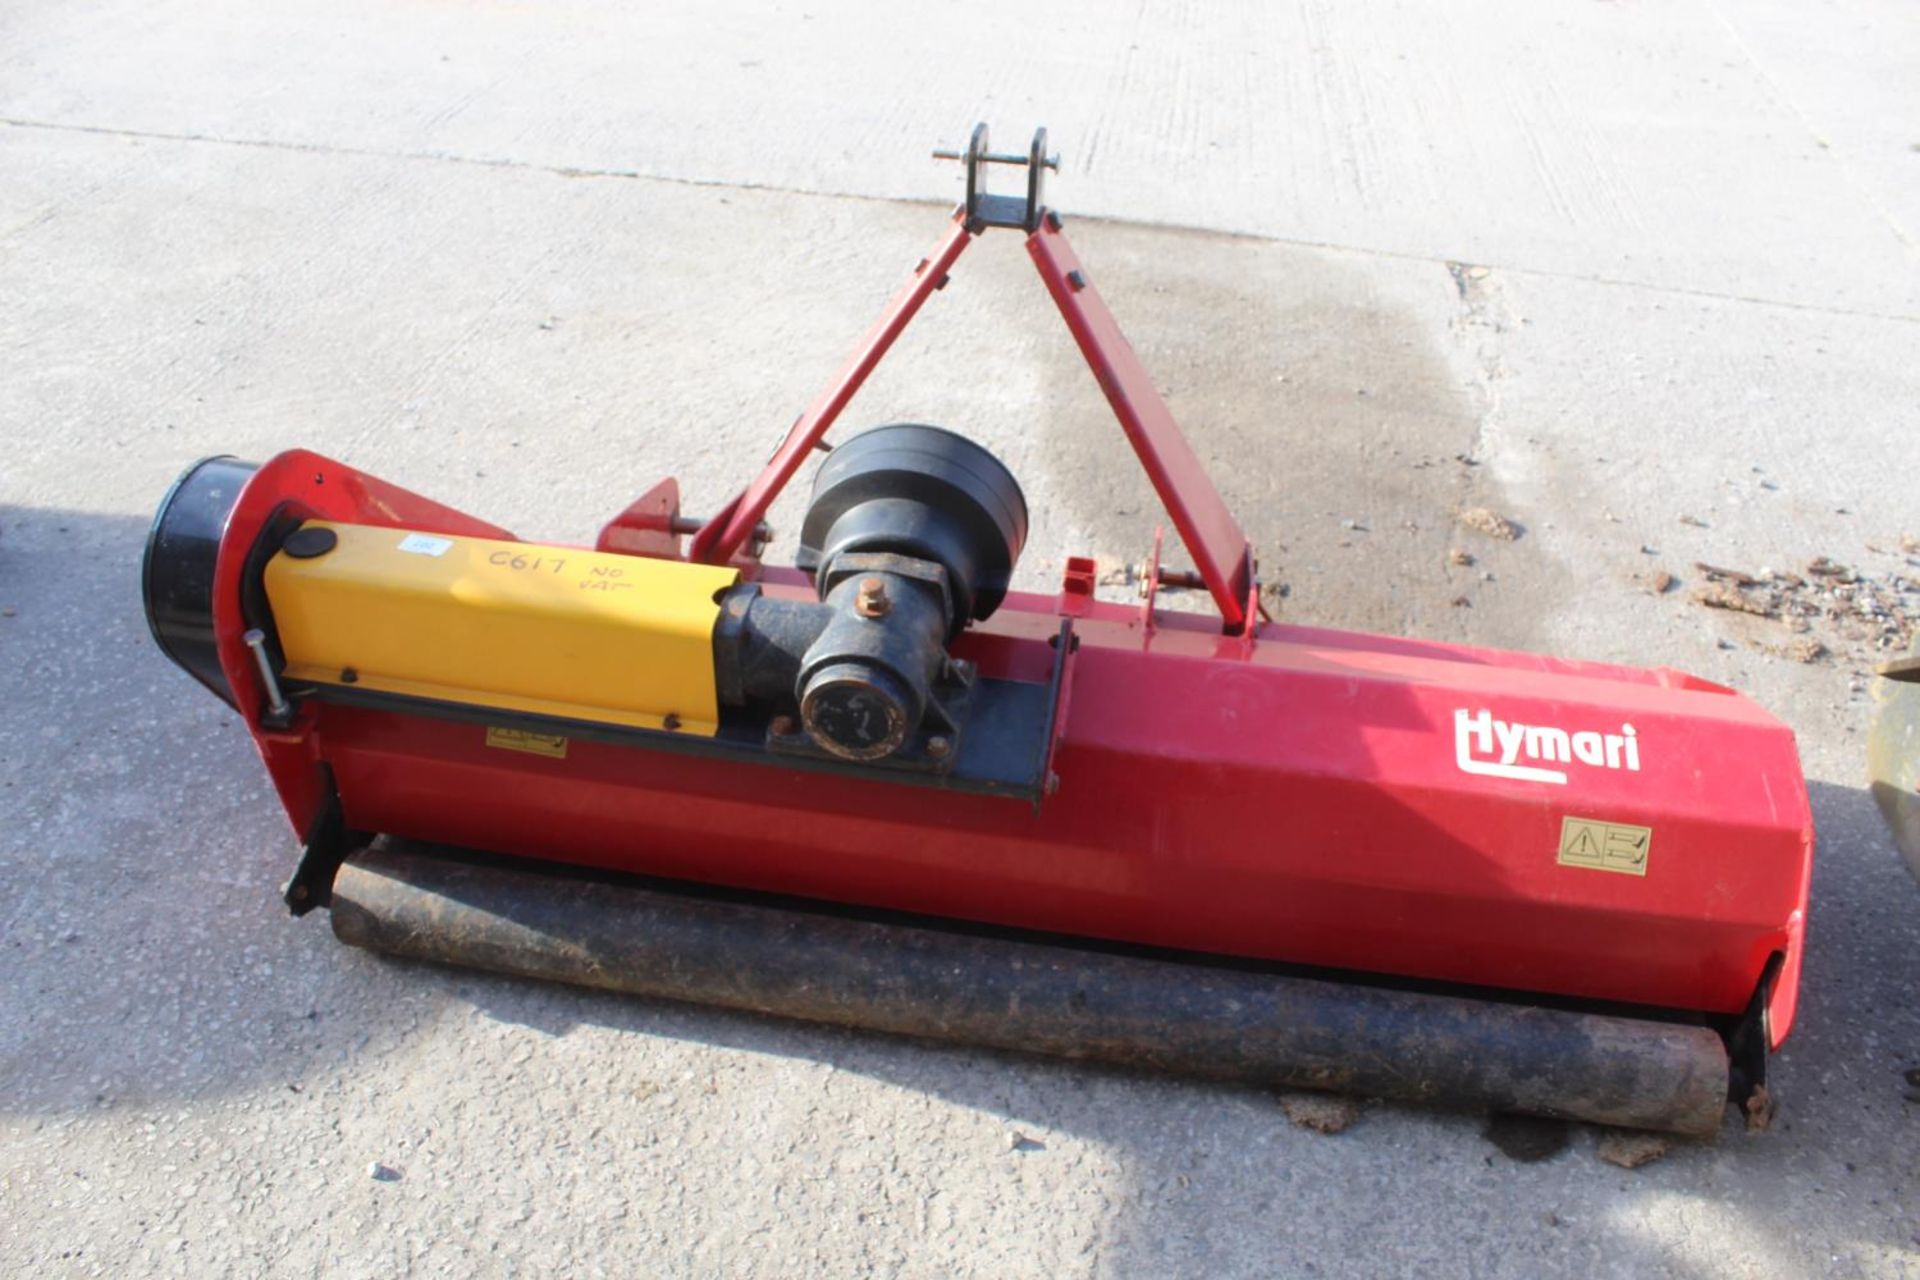 HYMARI 5' FLAIL MOWER MAXI 540 RPM ONLY USED 3 TIMES NO VAT - Image 2 of 2